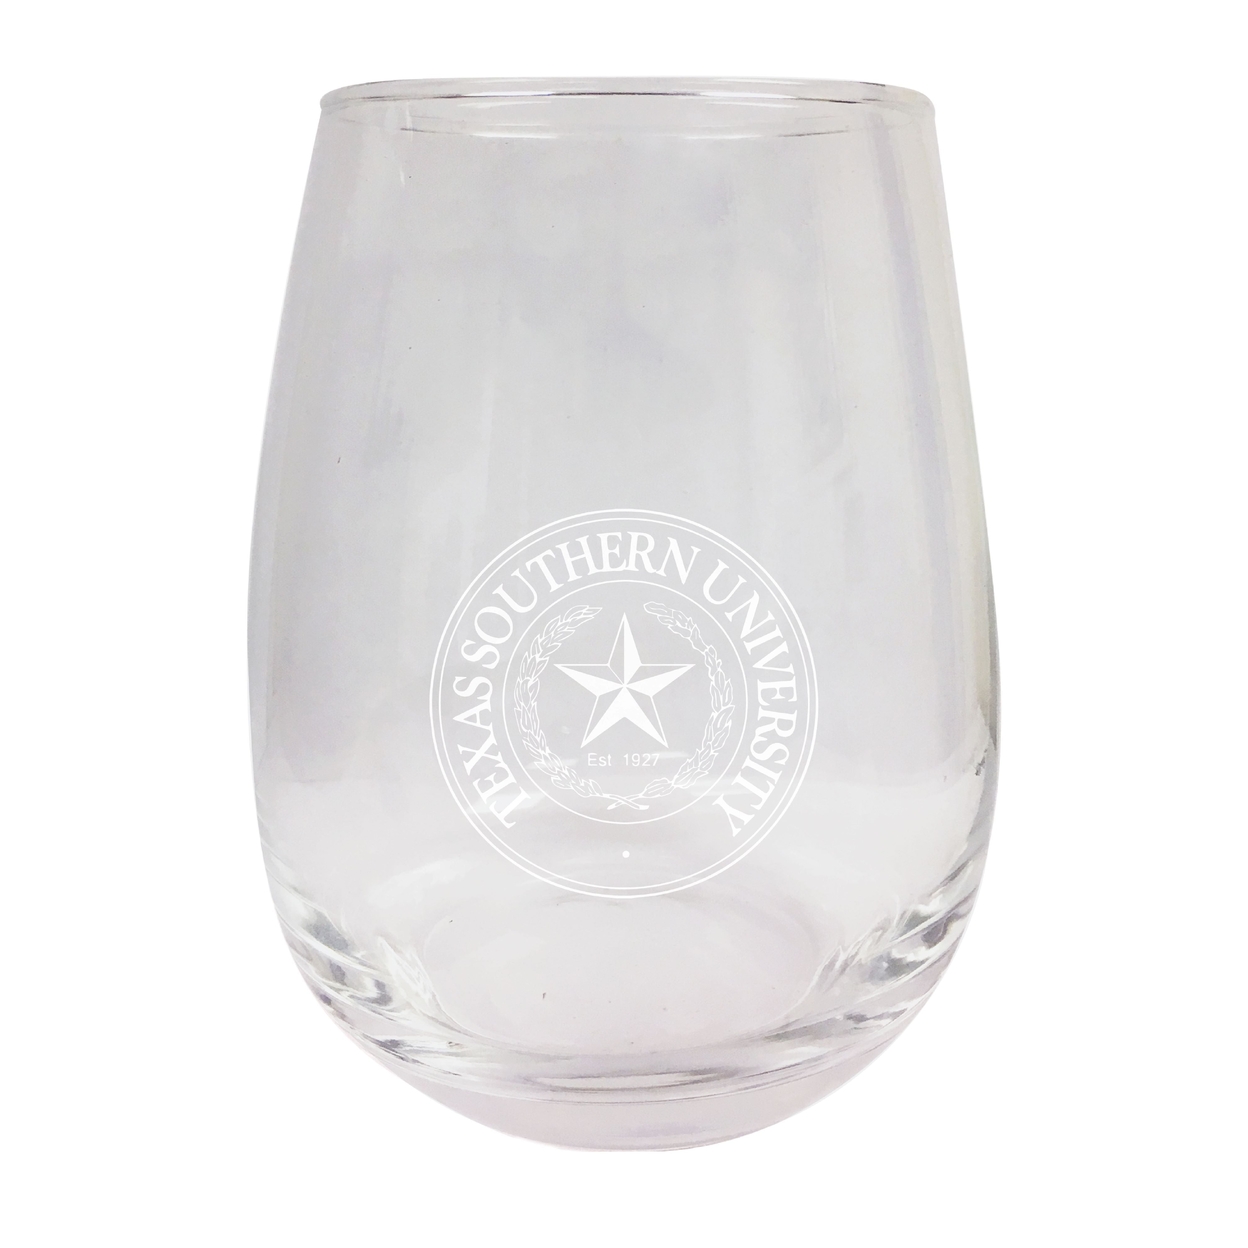 Texas Southern University Etched Stemless Wine Glass